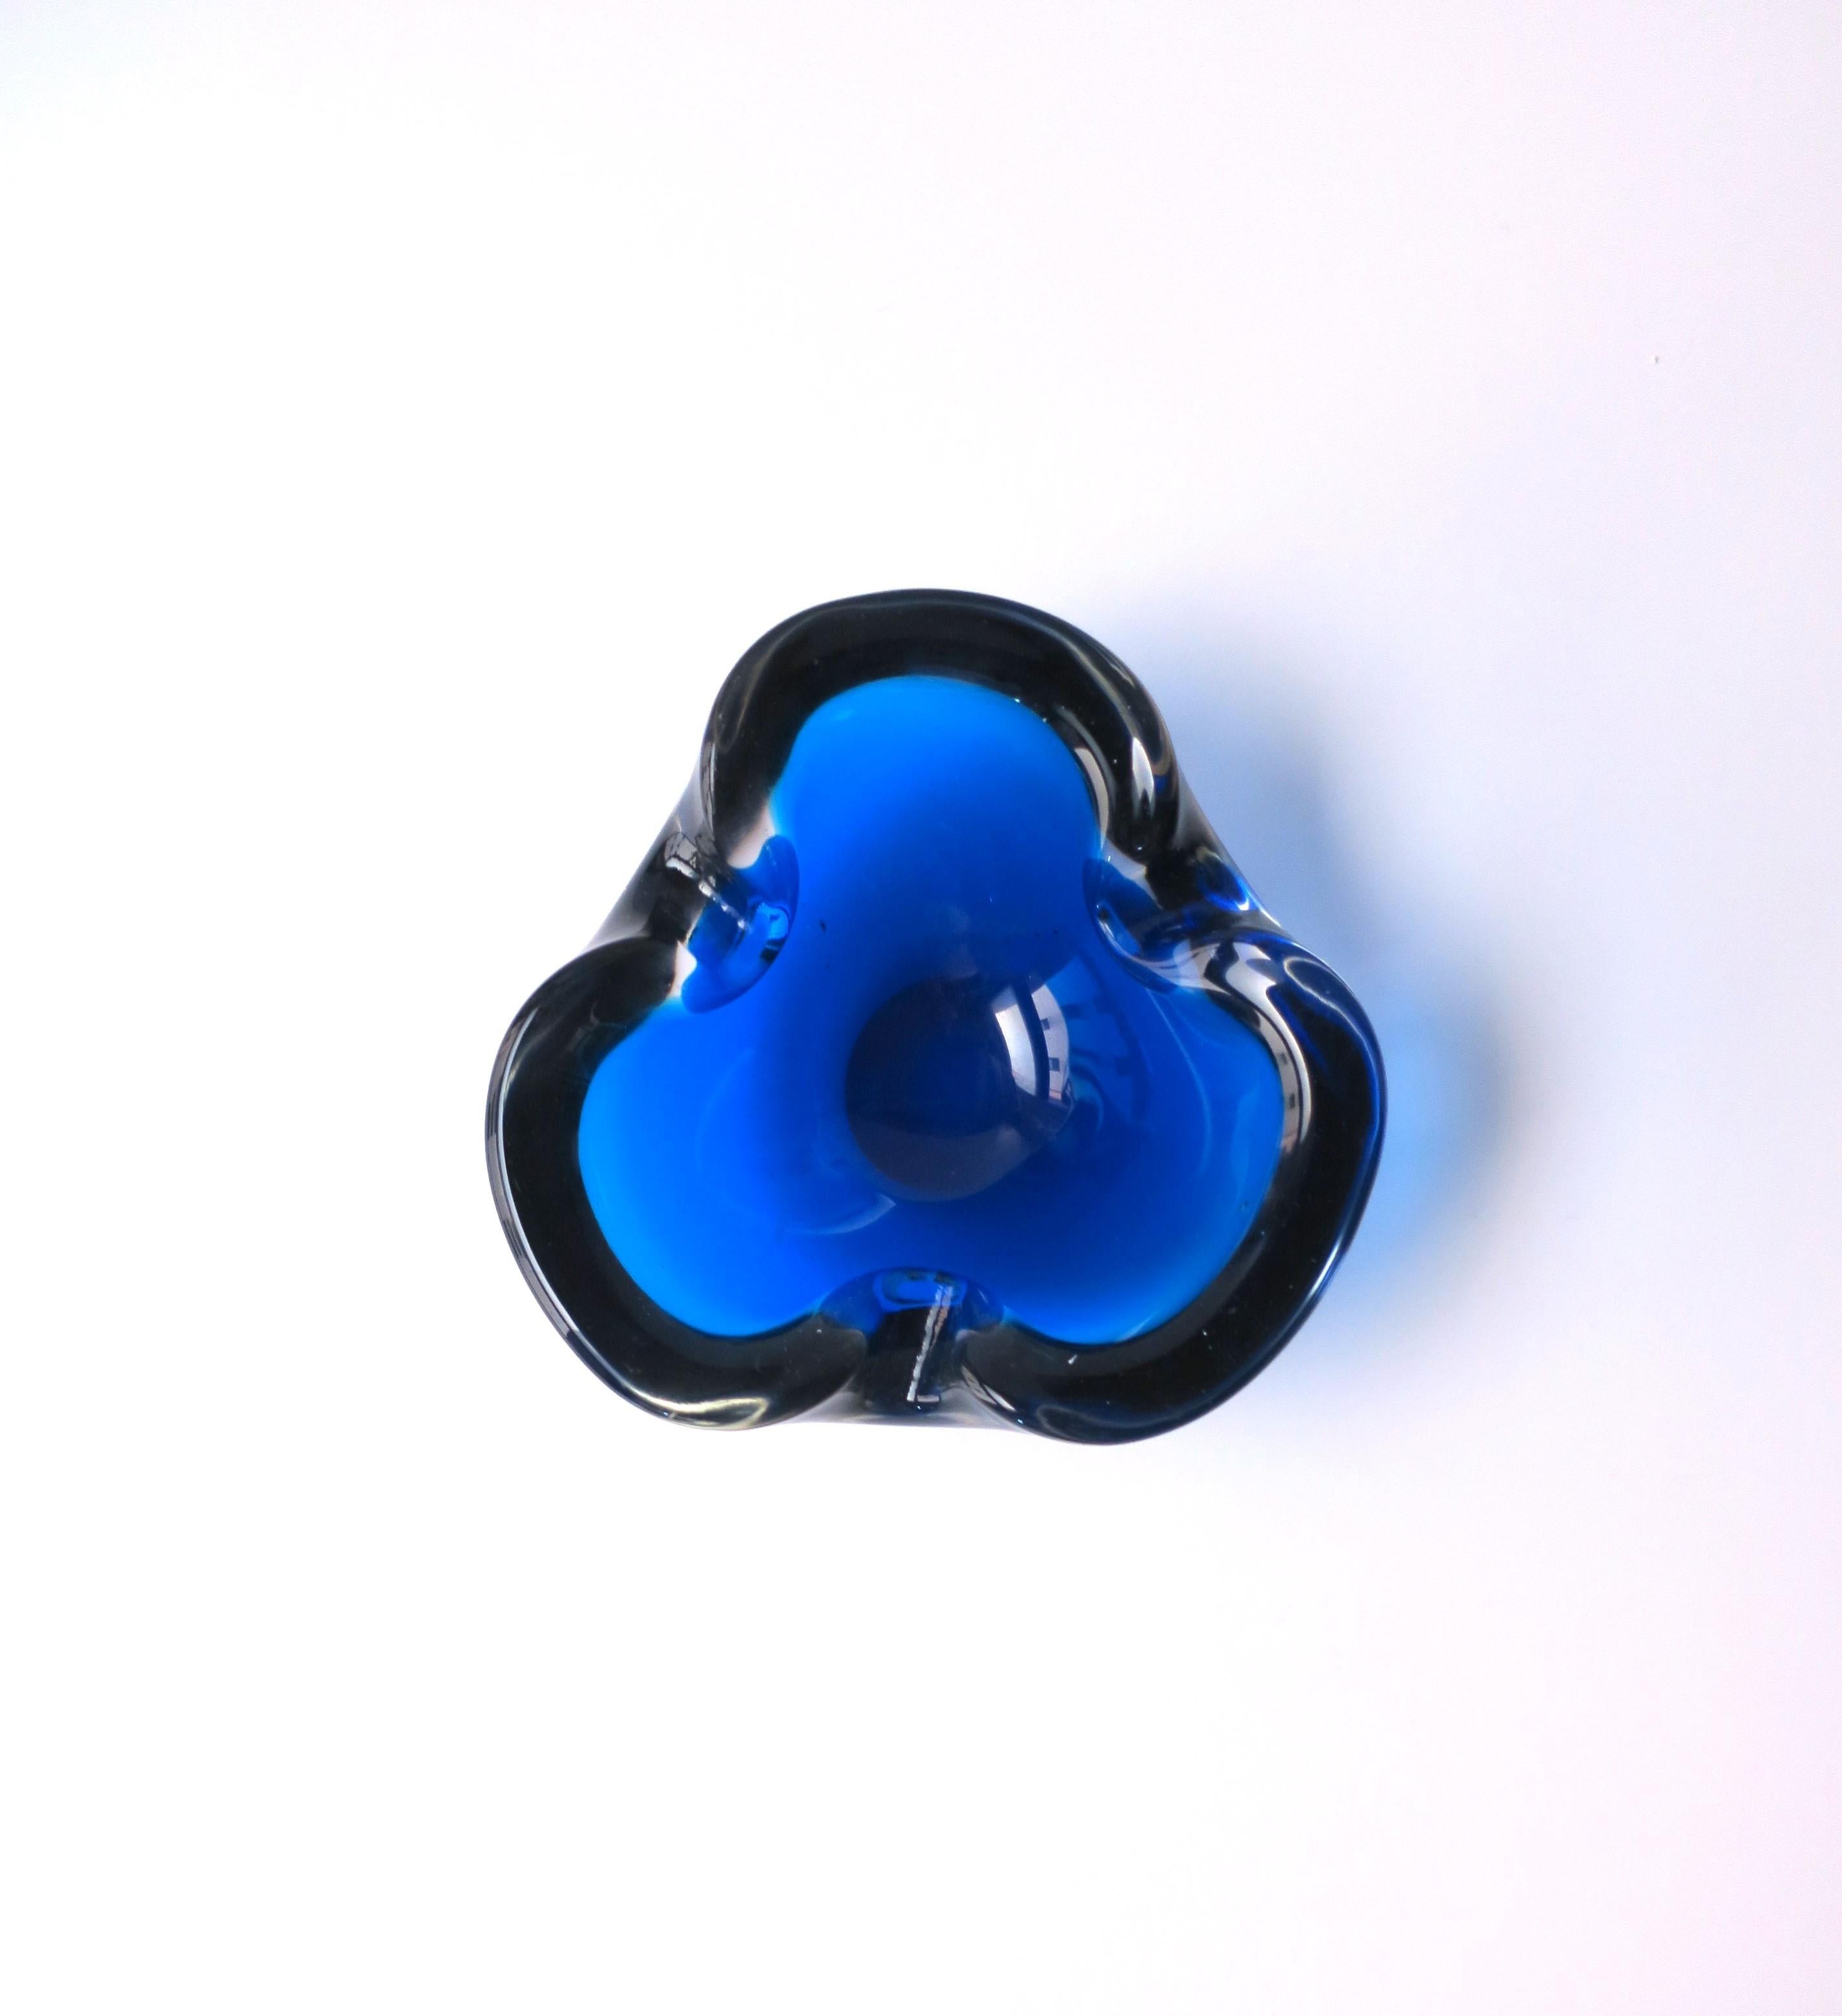 A substantial Italian Murano art glass bowl or ashtray in the style of artist Alfredo Barbini, Midcentury Modern period, circa mid-20th century, Italy. Piece is a rich cobalt or sapphire blue and transparent art glass. Great as a standalone piece